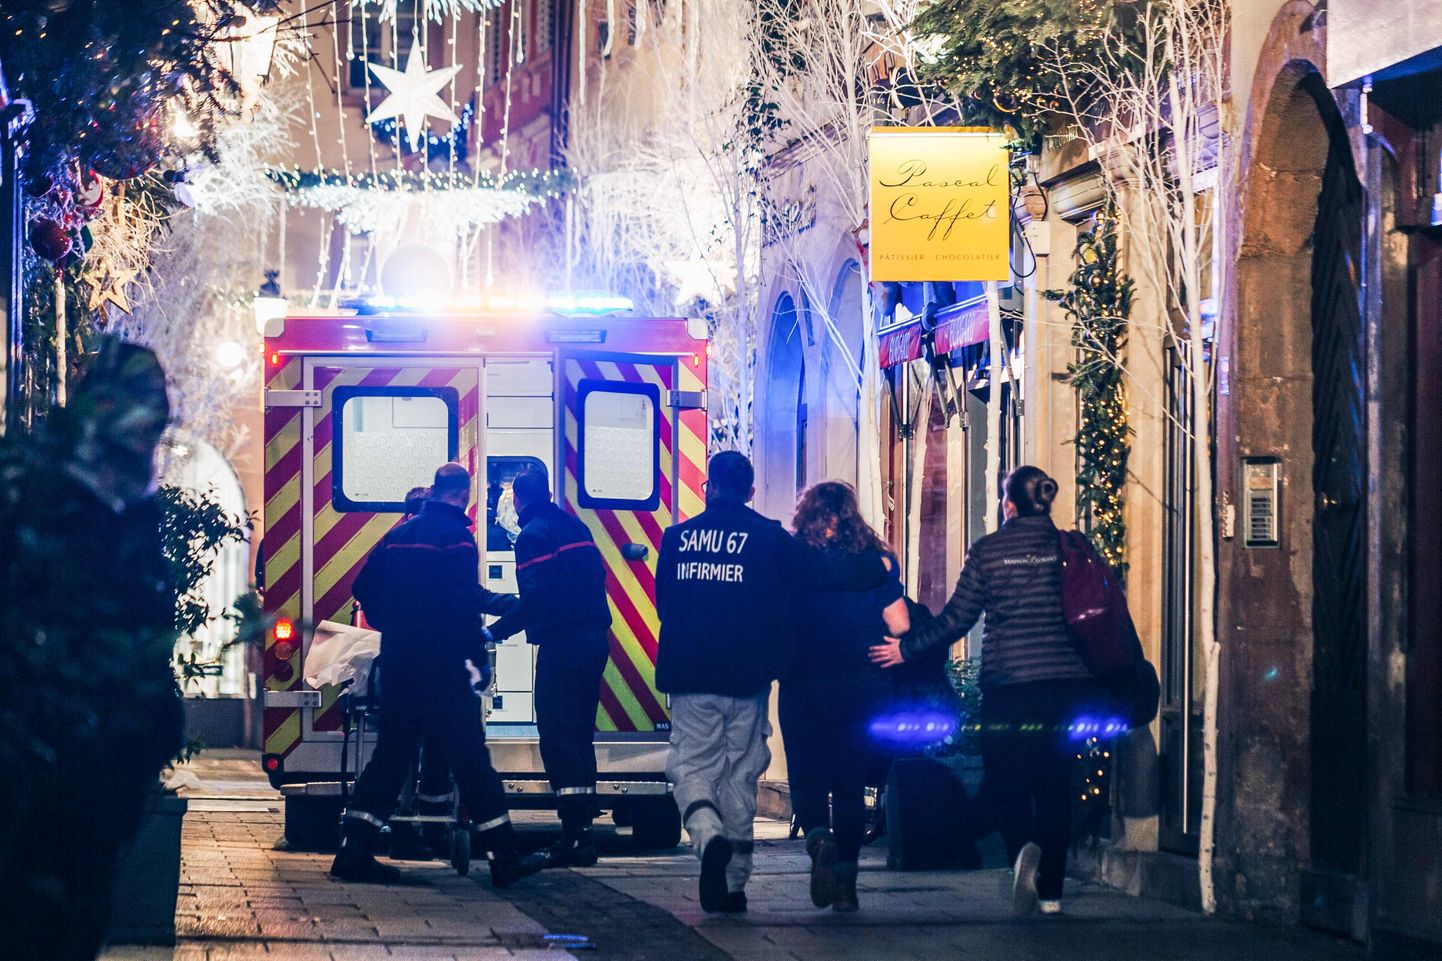 Emergency workers escort a woman after a shooting near the Christmas market in Strasbourg, eastern France, on December 11, 2018. - A gunman killed at least two people and seriously injured another 11 near the famed Christmas market in the French city of Strasbourg before fleeing the scene, security officials said. Police launched a manhunt after the killer opened fire at around 7pm local time (1800 GMT), sending crowds of evening shoppers fleeing for safety. (Photo by Abdesslam MIRDASS / AFP)